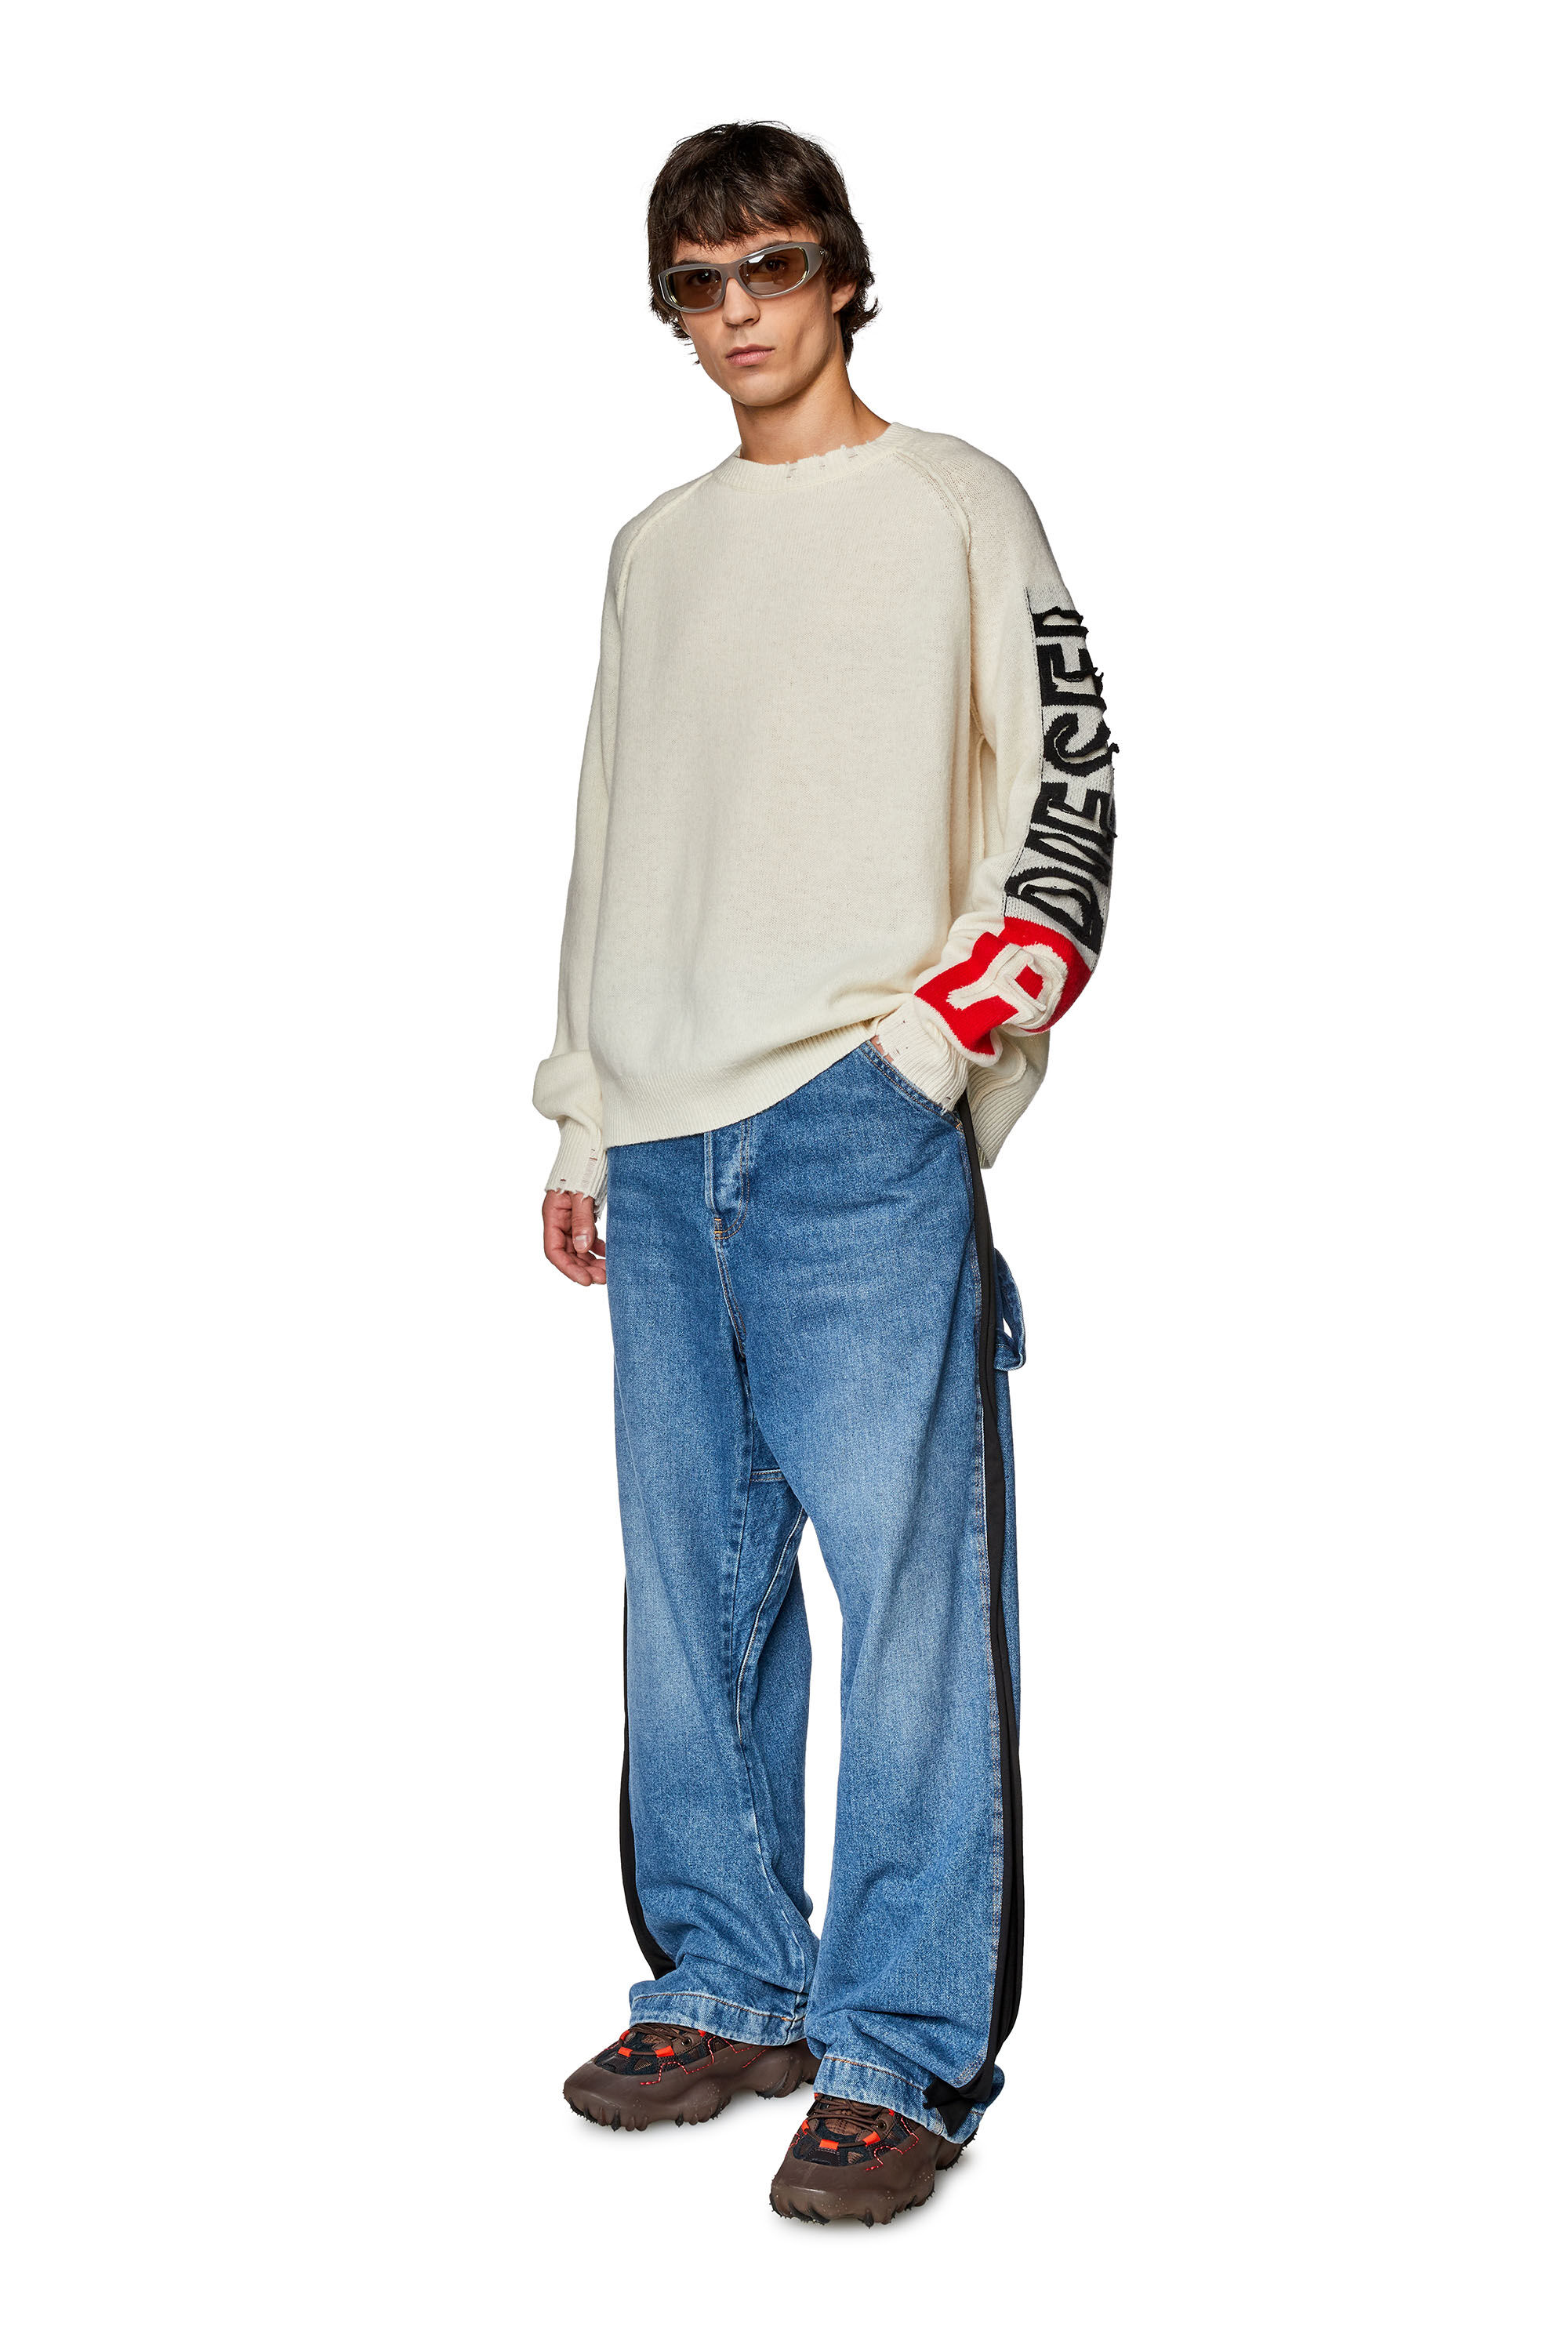 Men's Wool sweater with cut-up logo